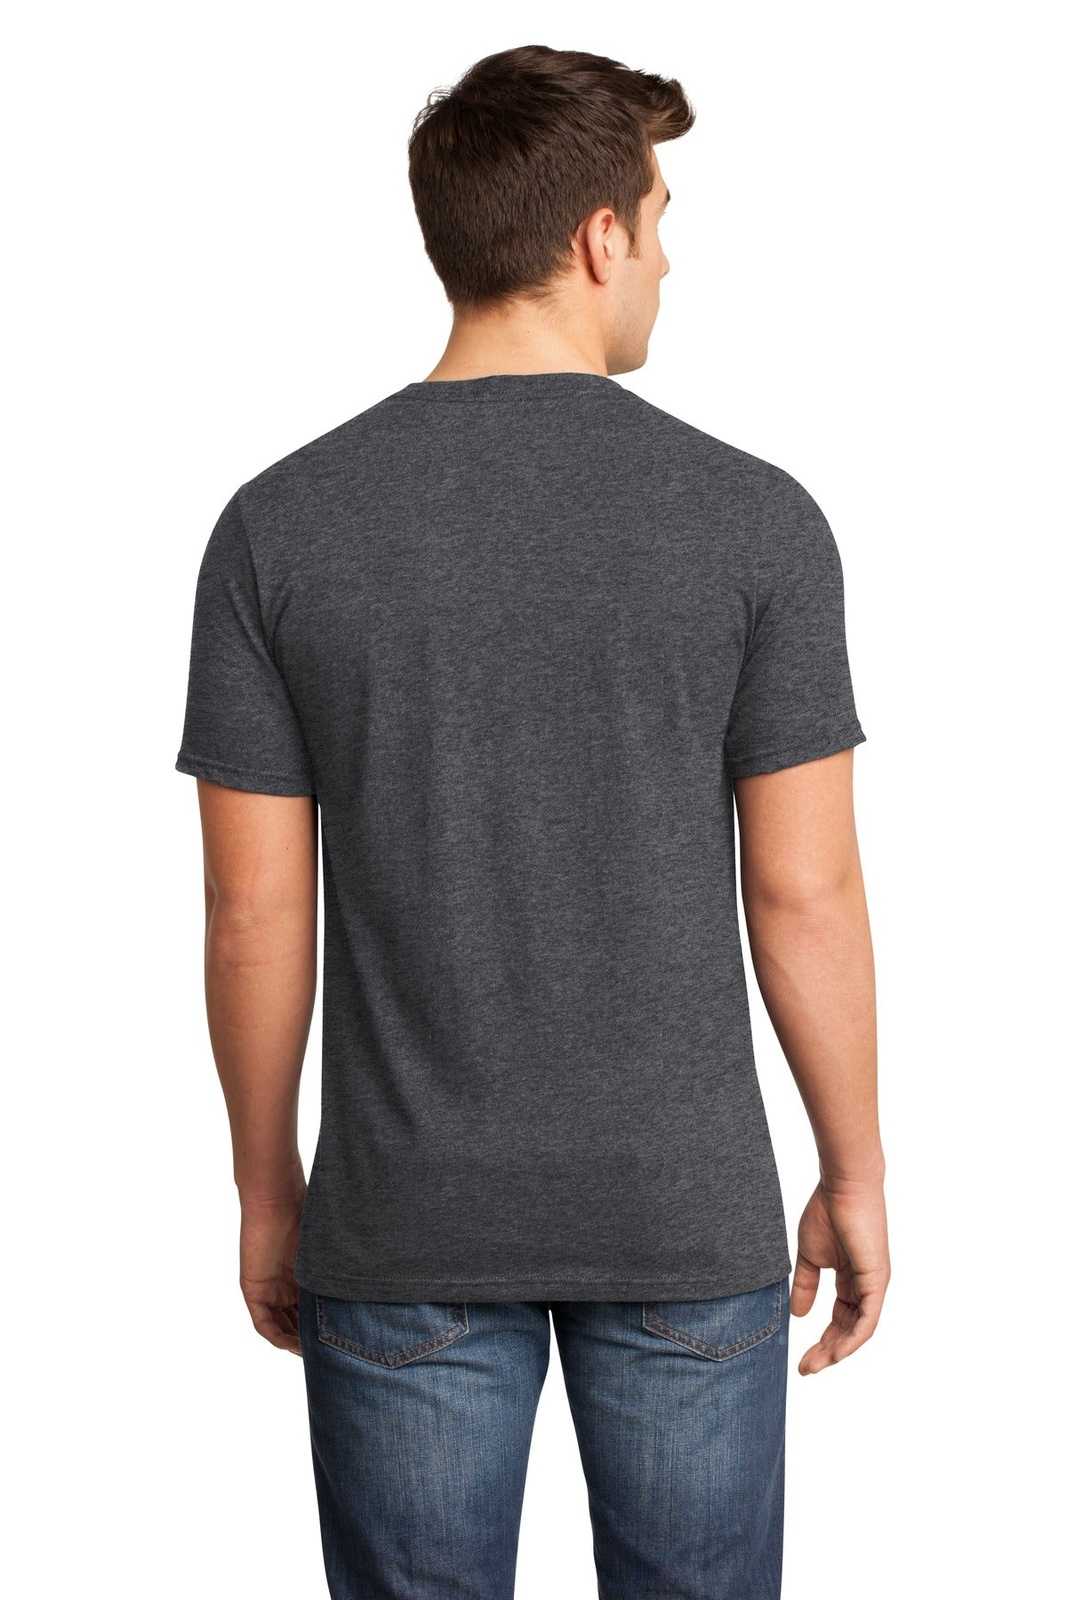 District DT6500 Very Important Tee V-Neck - Heathered Charcoal - HIT a Double - 1